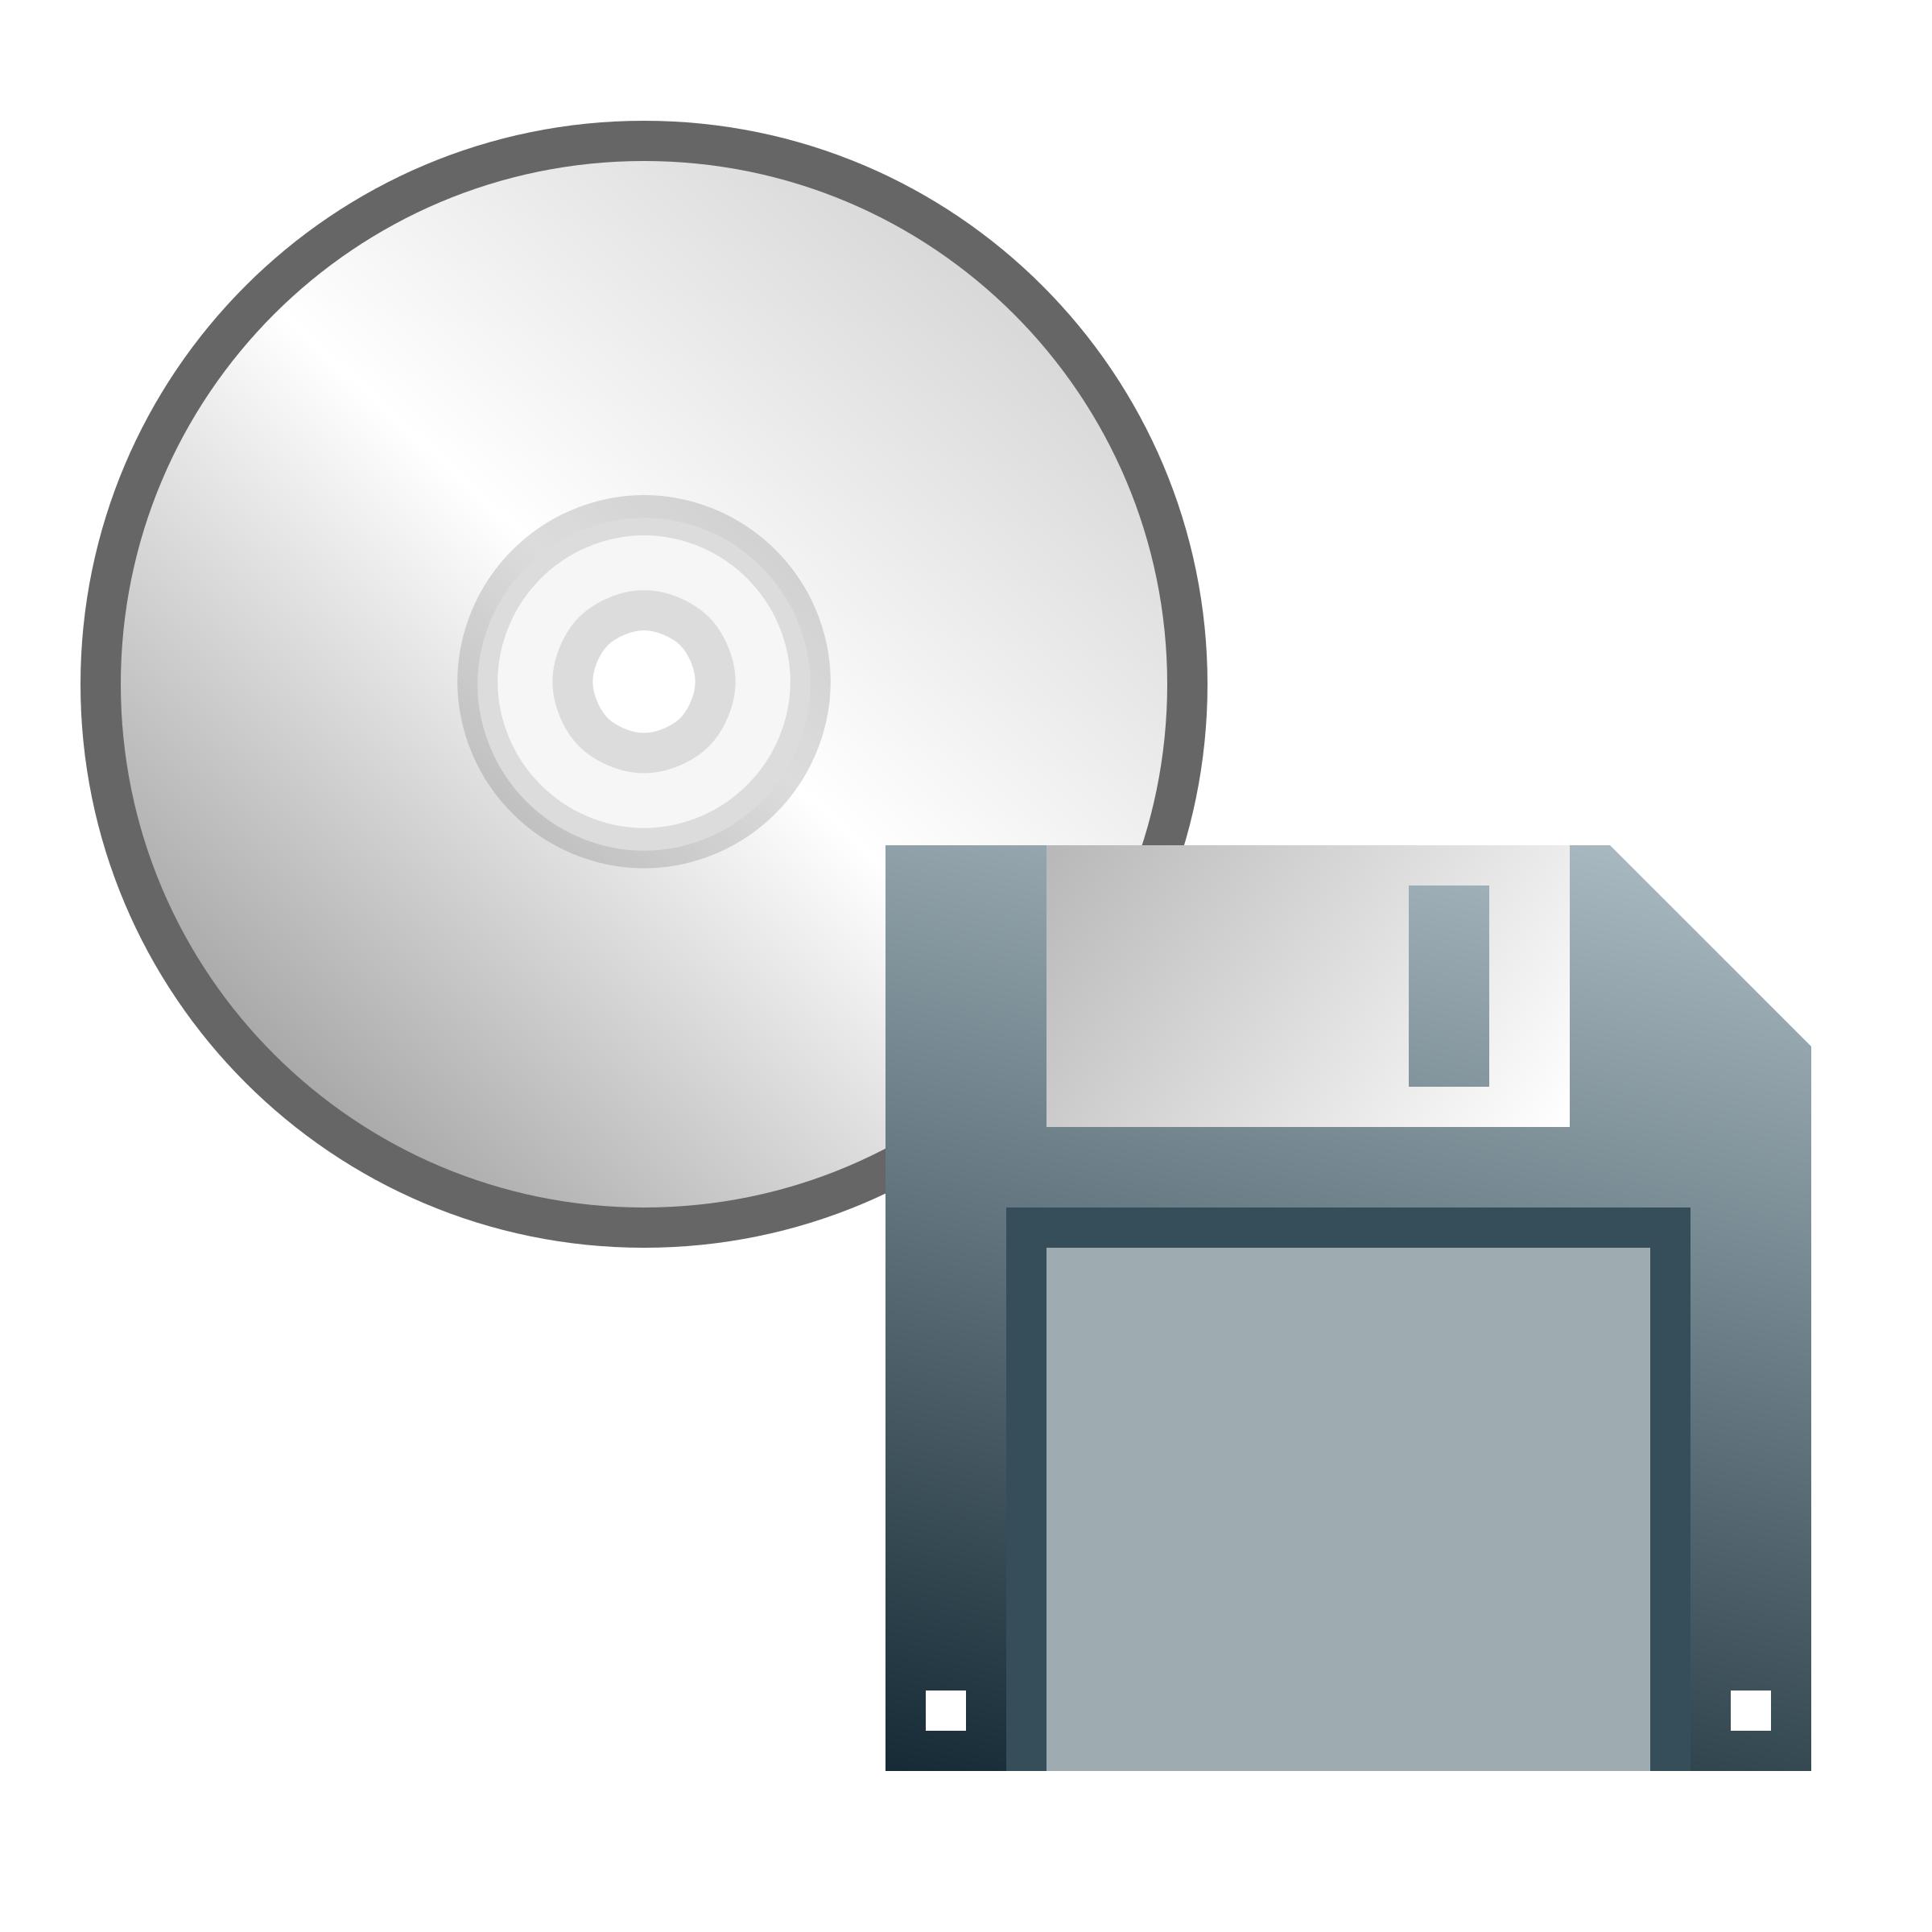 CD or floppy disk icon PNG icons